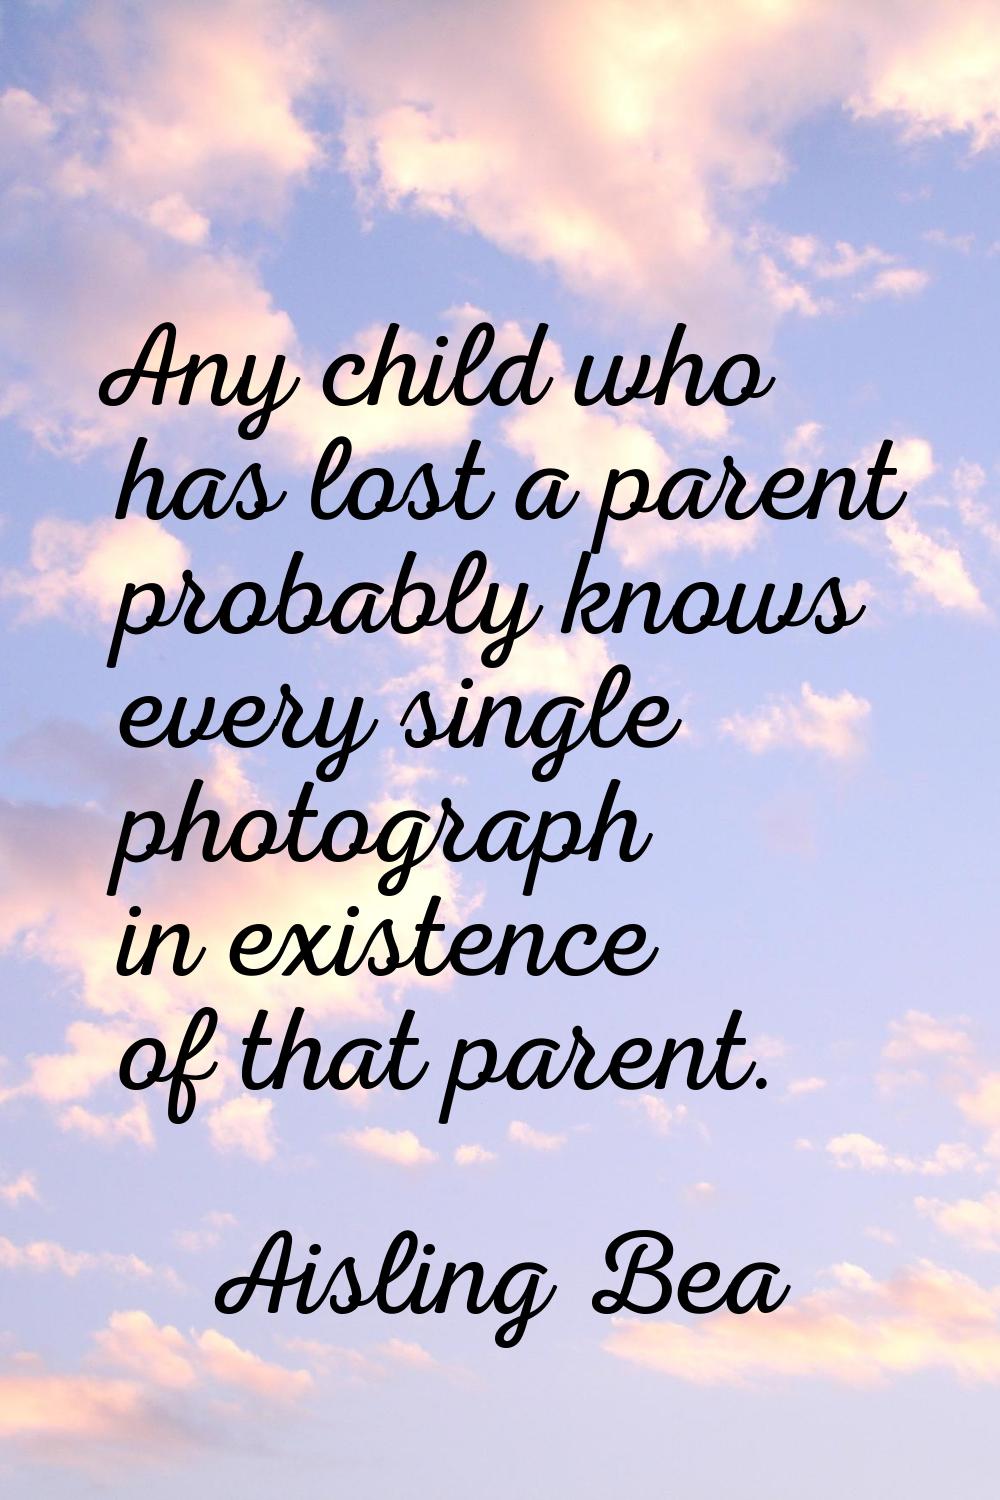 Any child who has lost a parent probably knows every single photograph in existence of that parent.